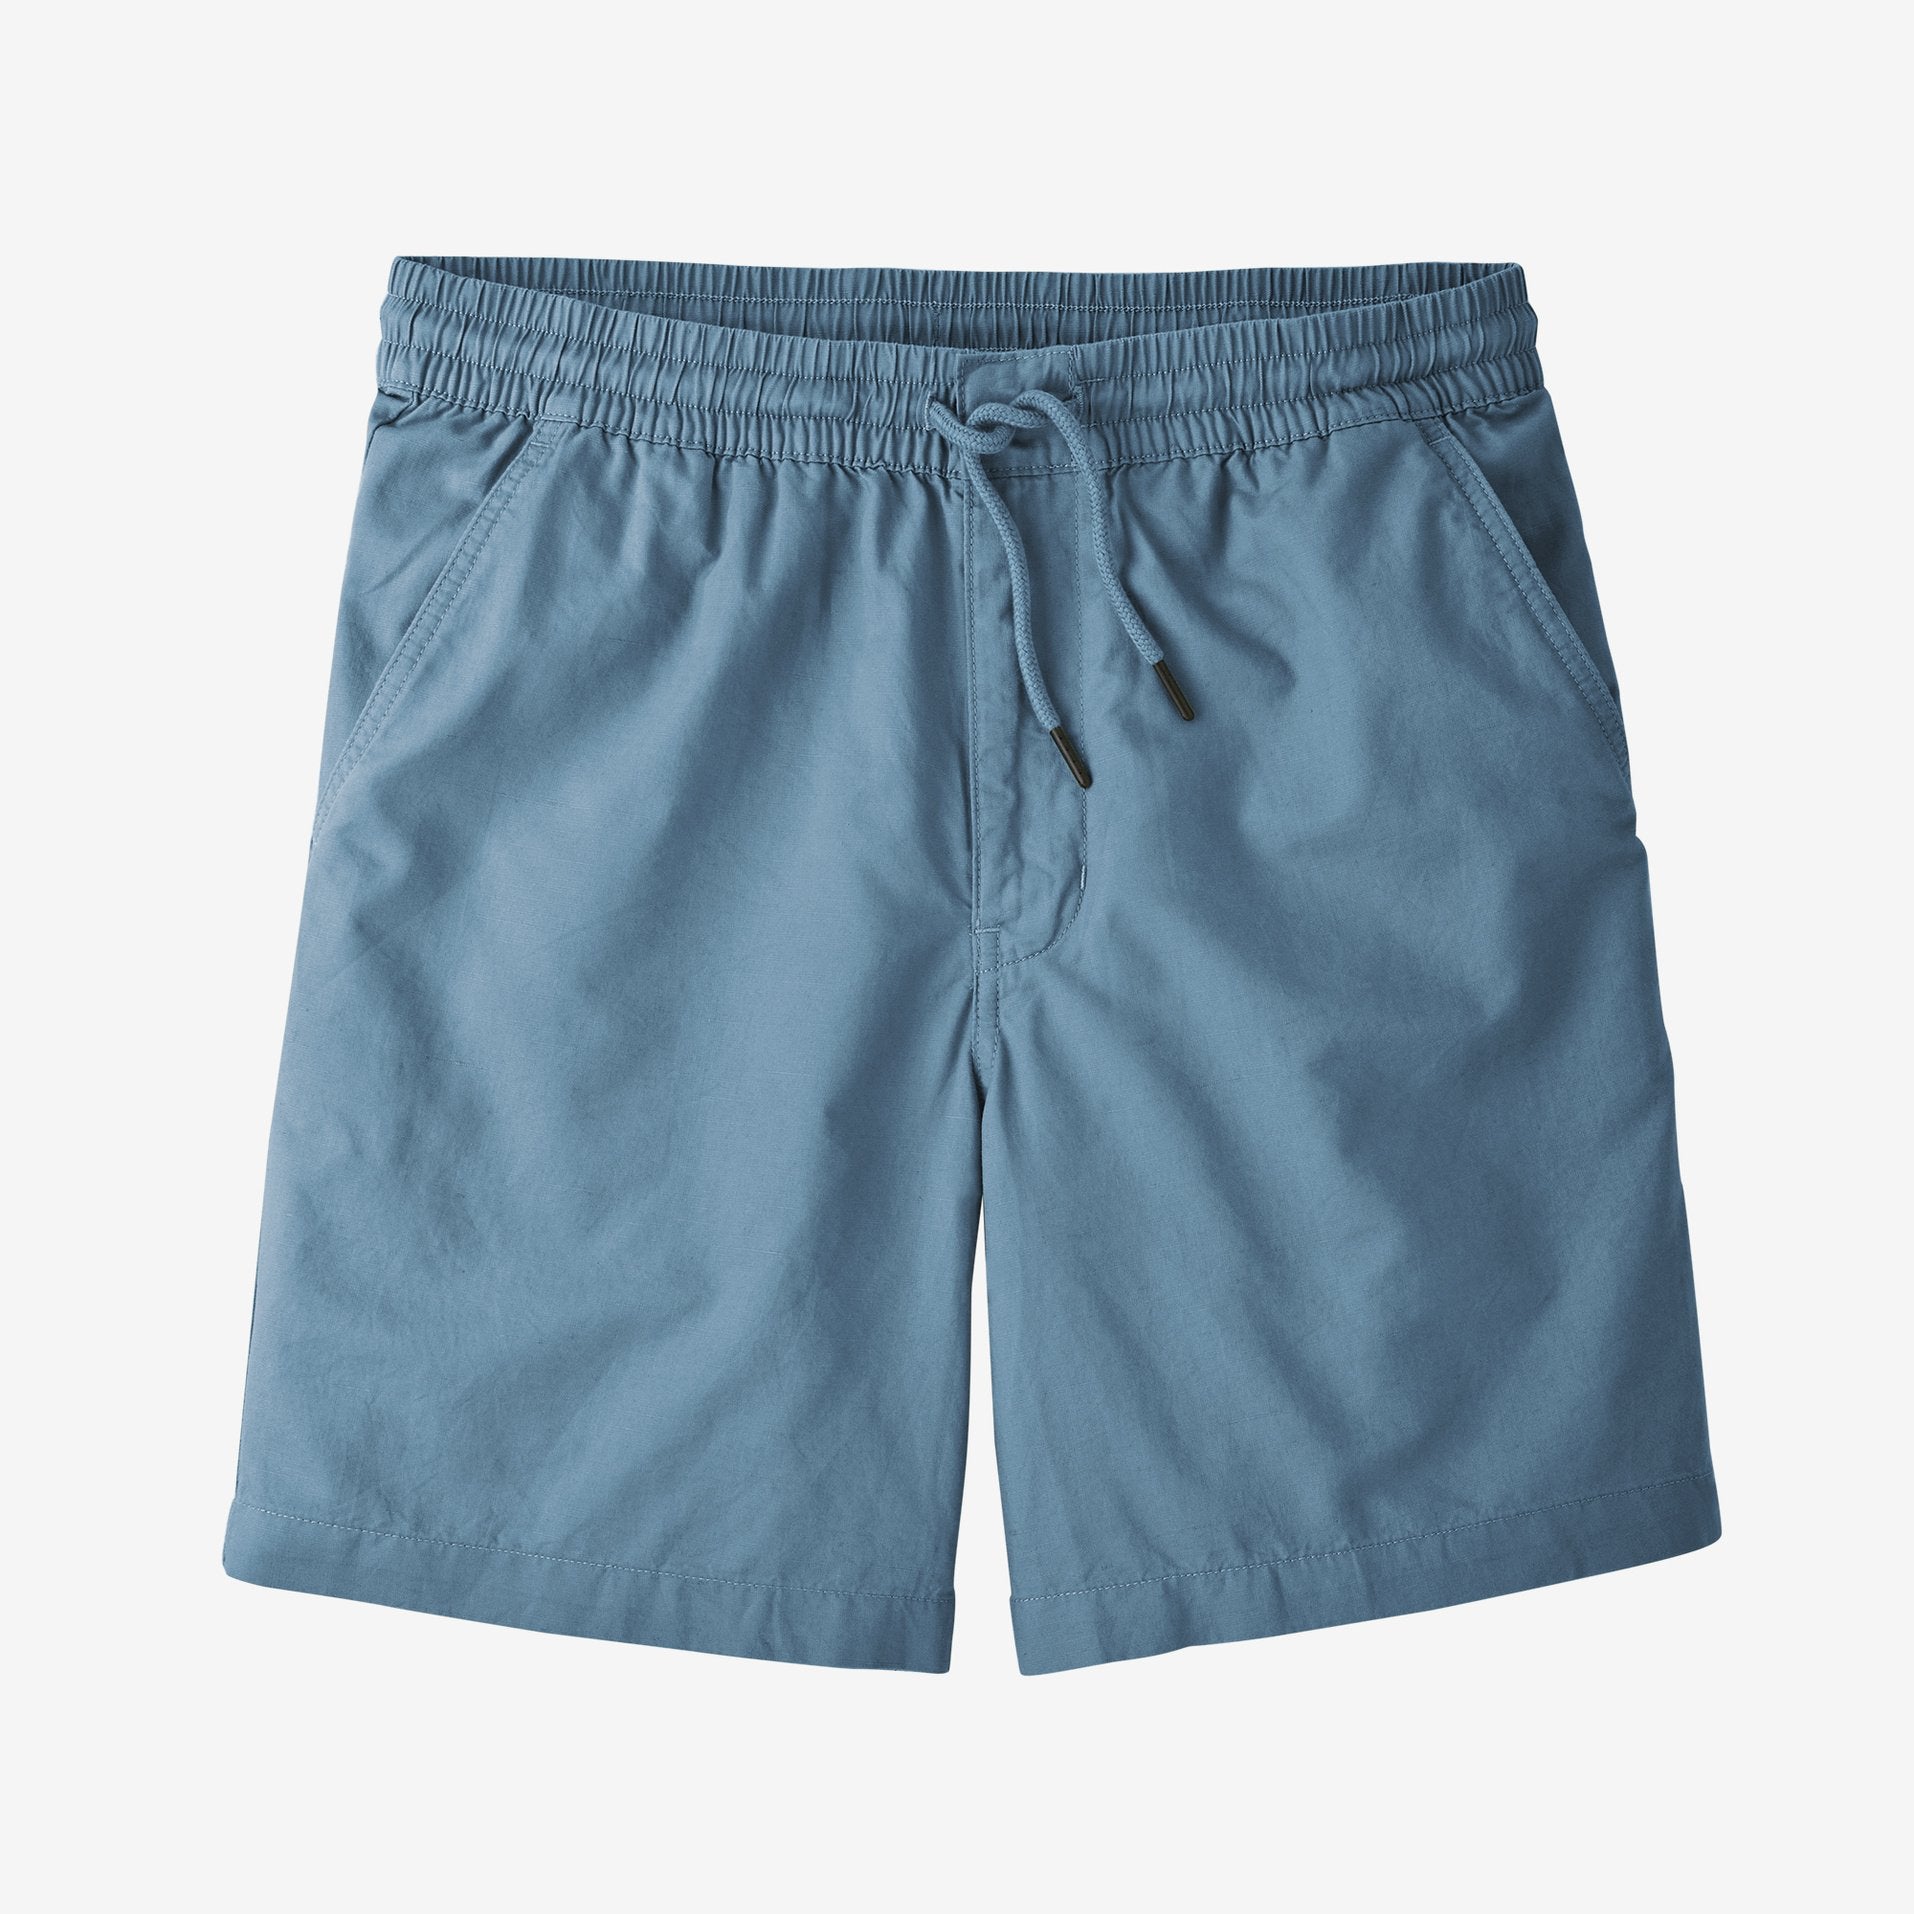 Patagonia Men's M's Light Weight All-Wear Hemp Volley Shorts Apparel Patagonia Small Pigeon Blue-PGBE 